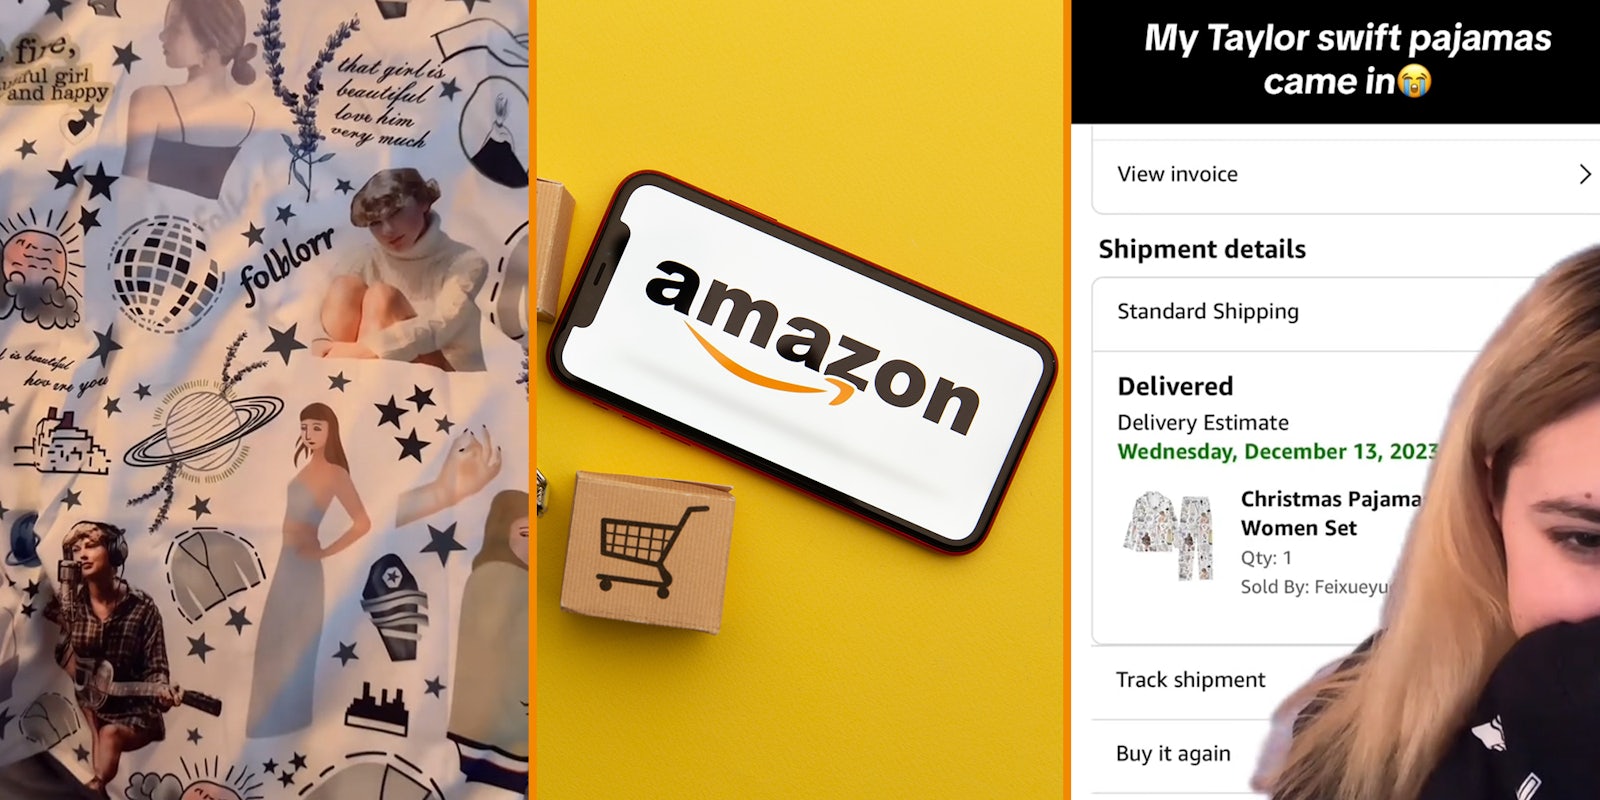 Woman orders Taylor Swift pajamas on Amazon, receives hilarious knock-off